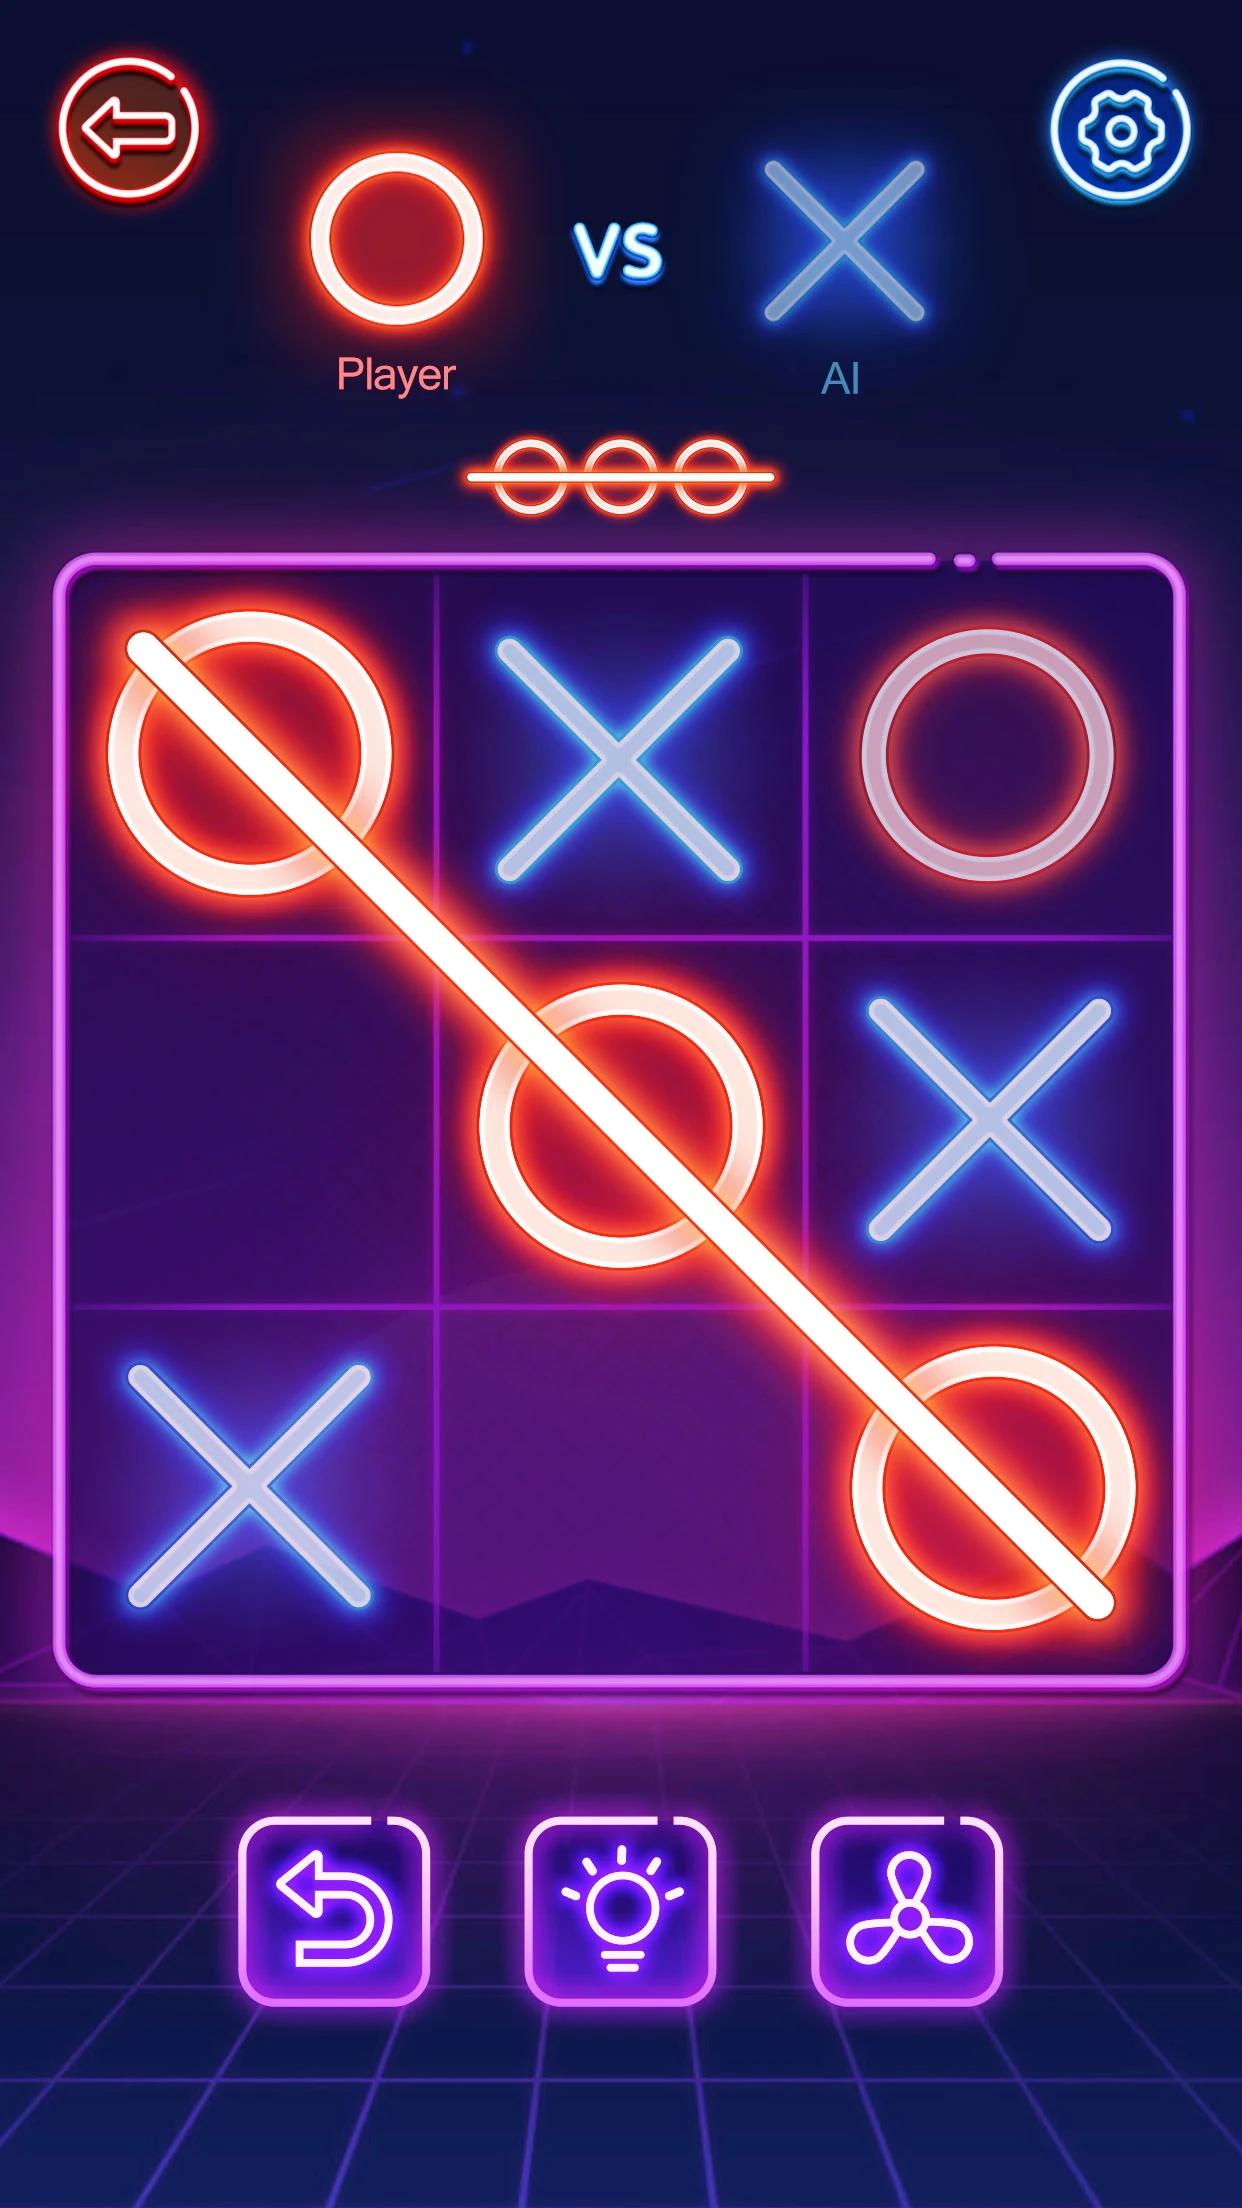 Download Tic Tac Toe - 2 Player XO on PC with MEmu